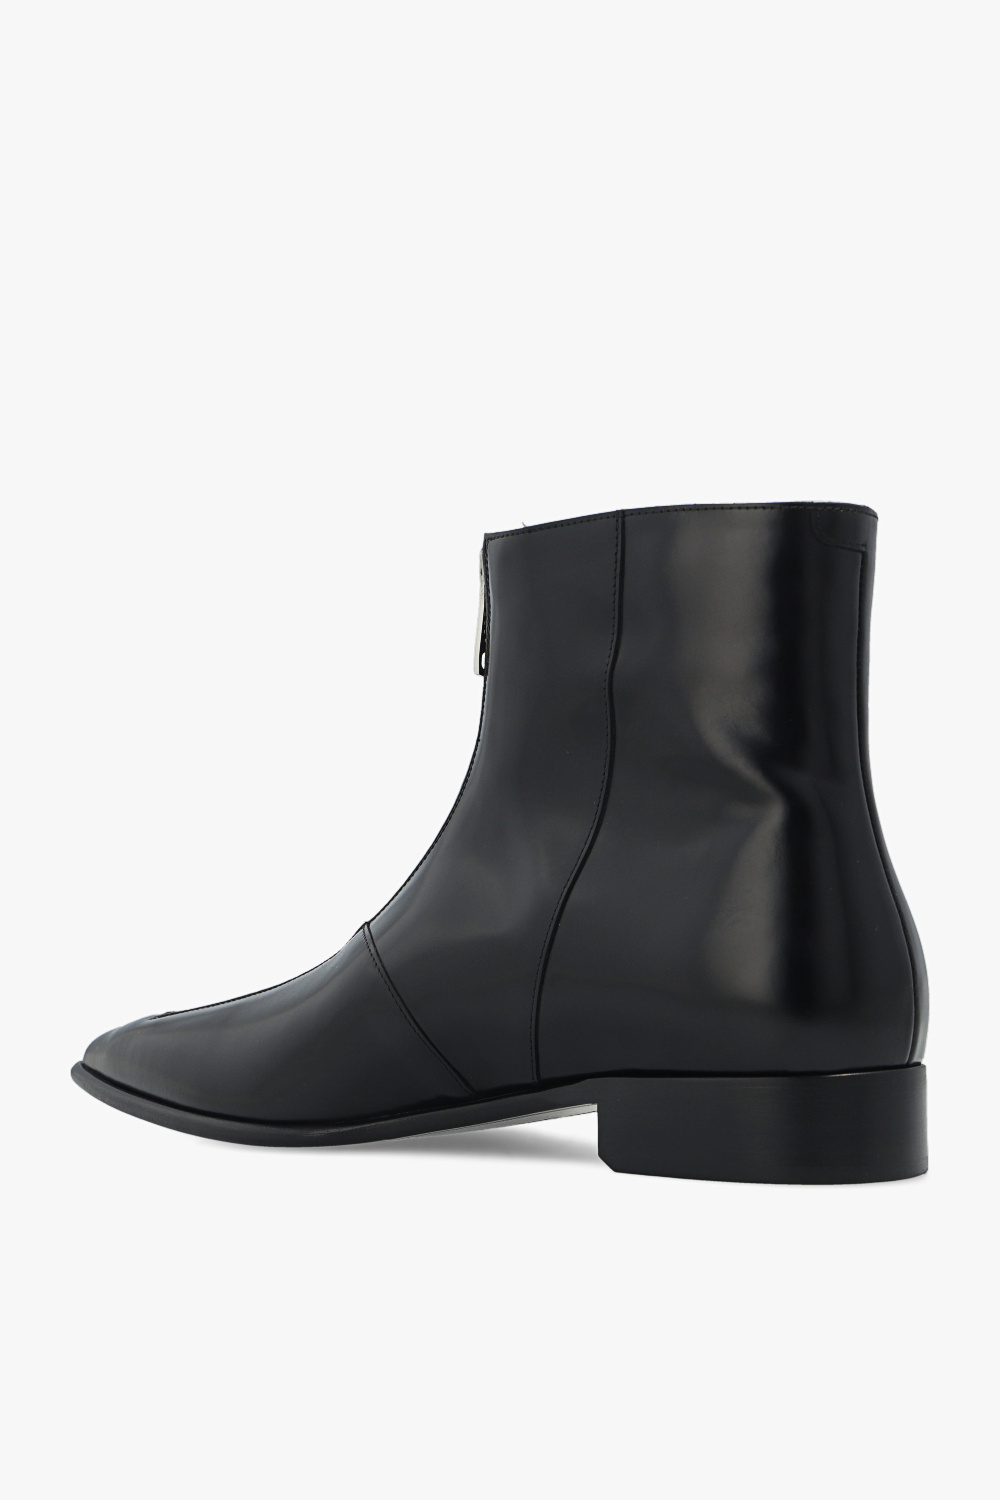 dolce carretto & gabbana skinny jeans ‘Achille’ ankle boots